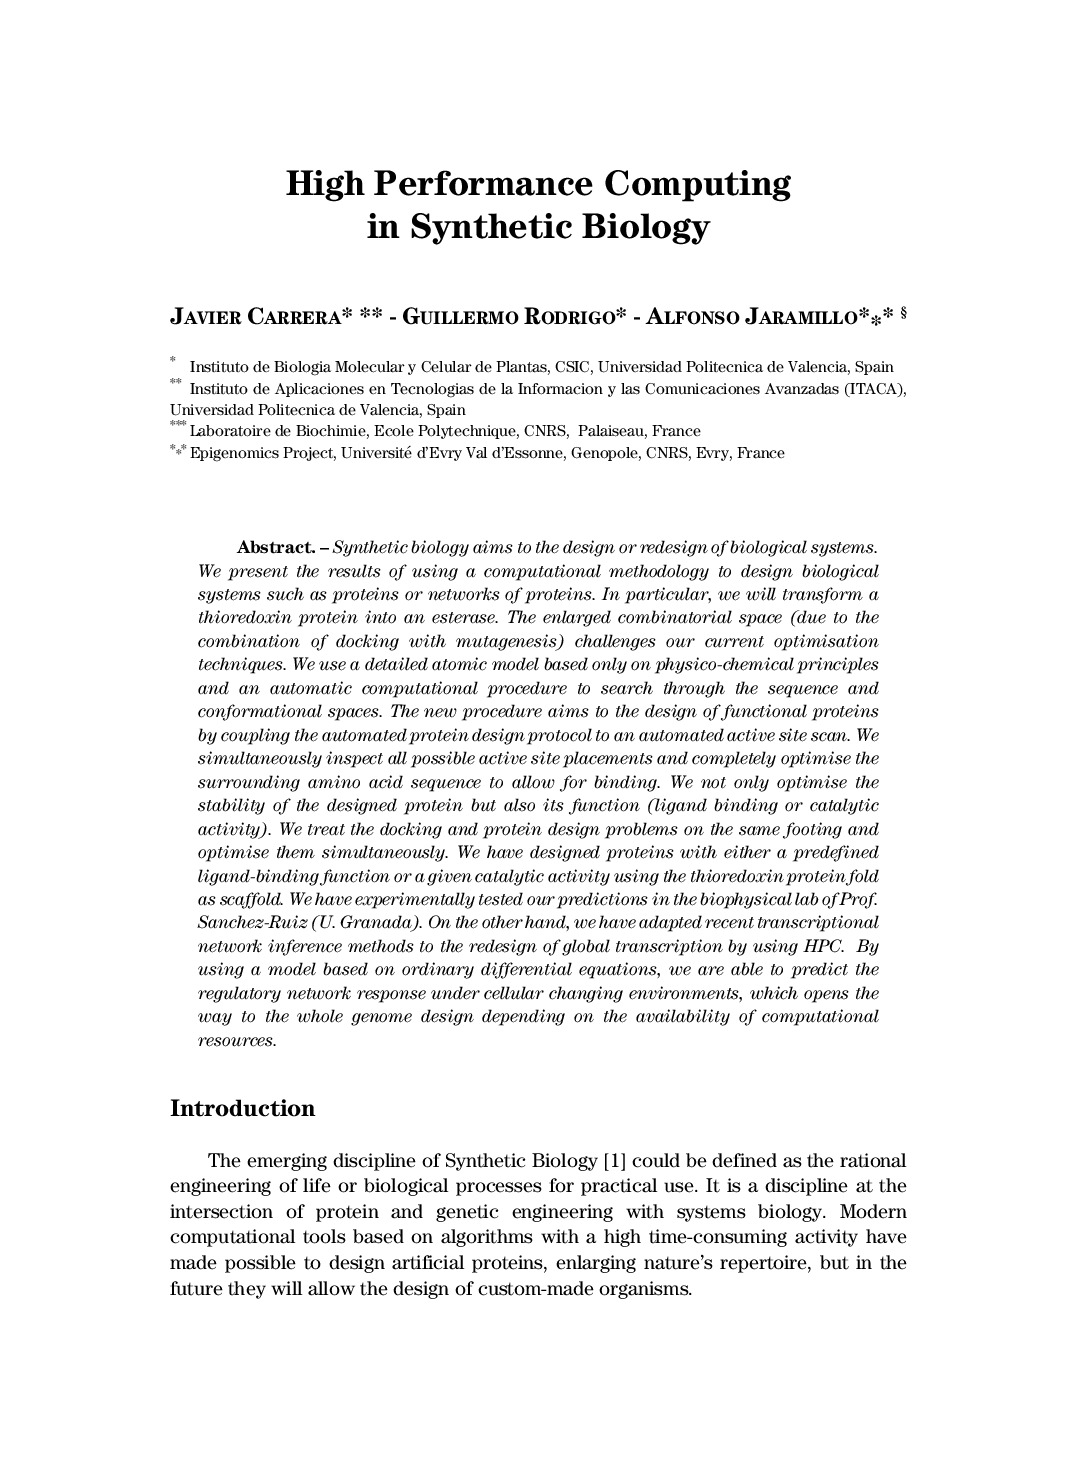 High Performance Computing in Synthetic Biology